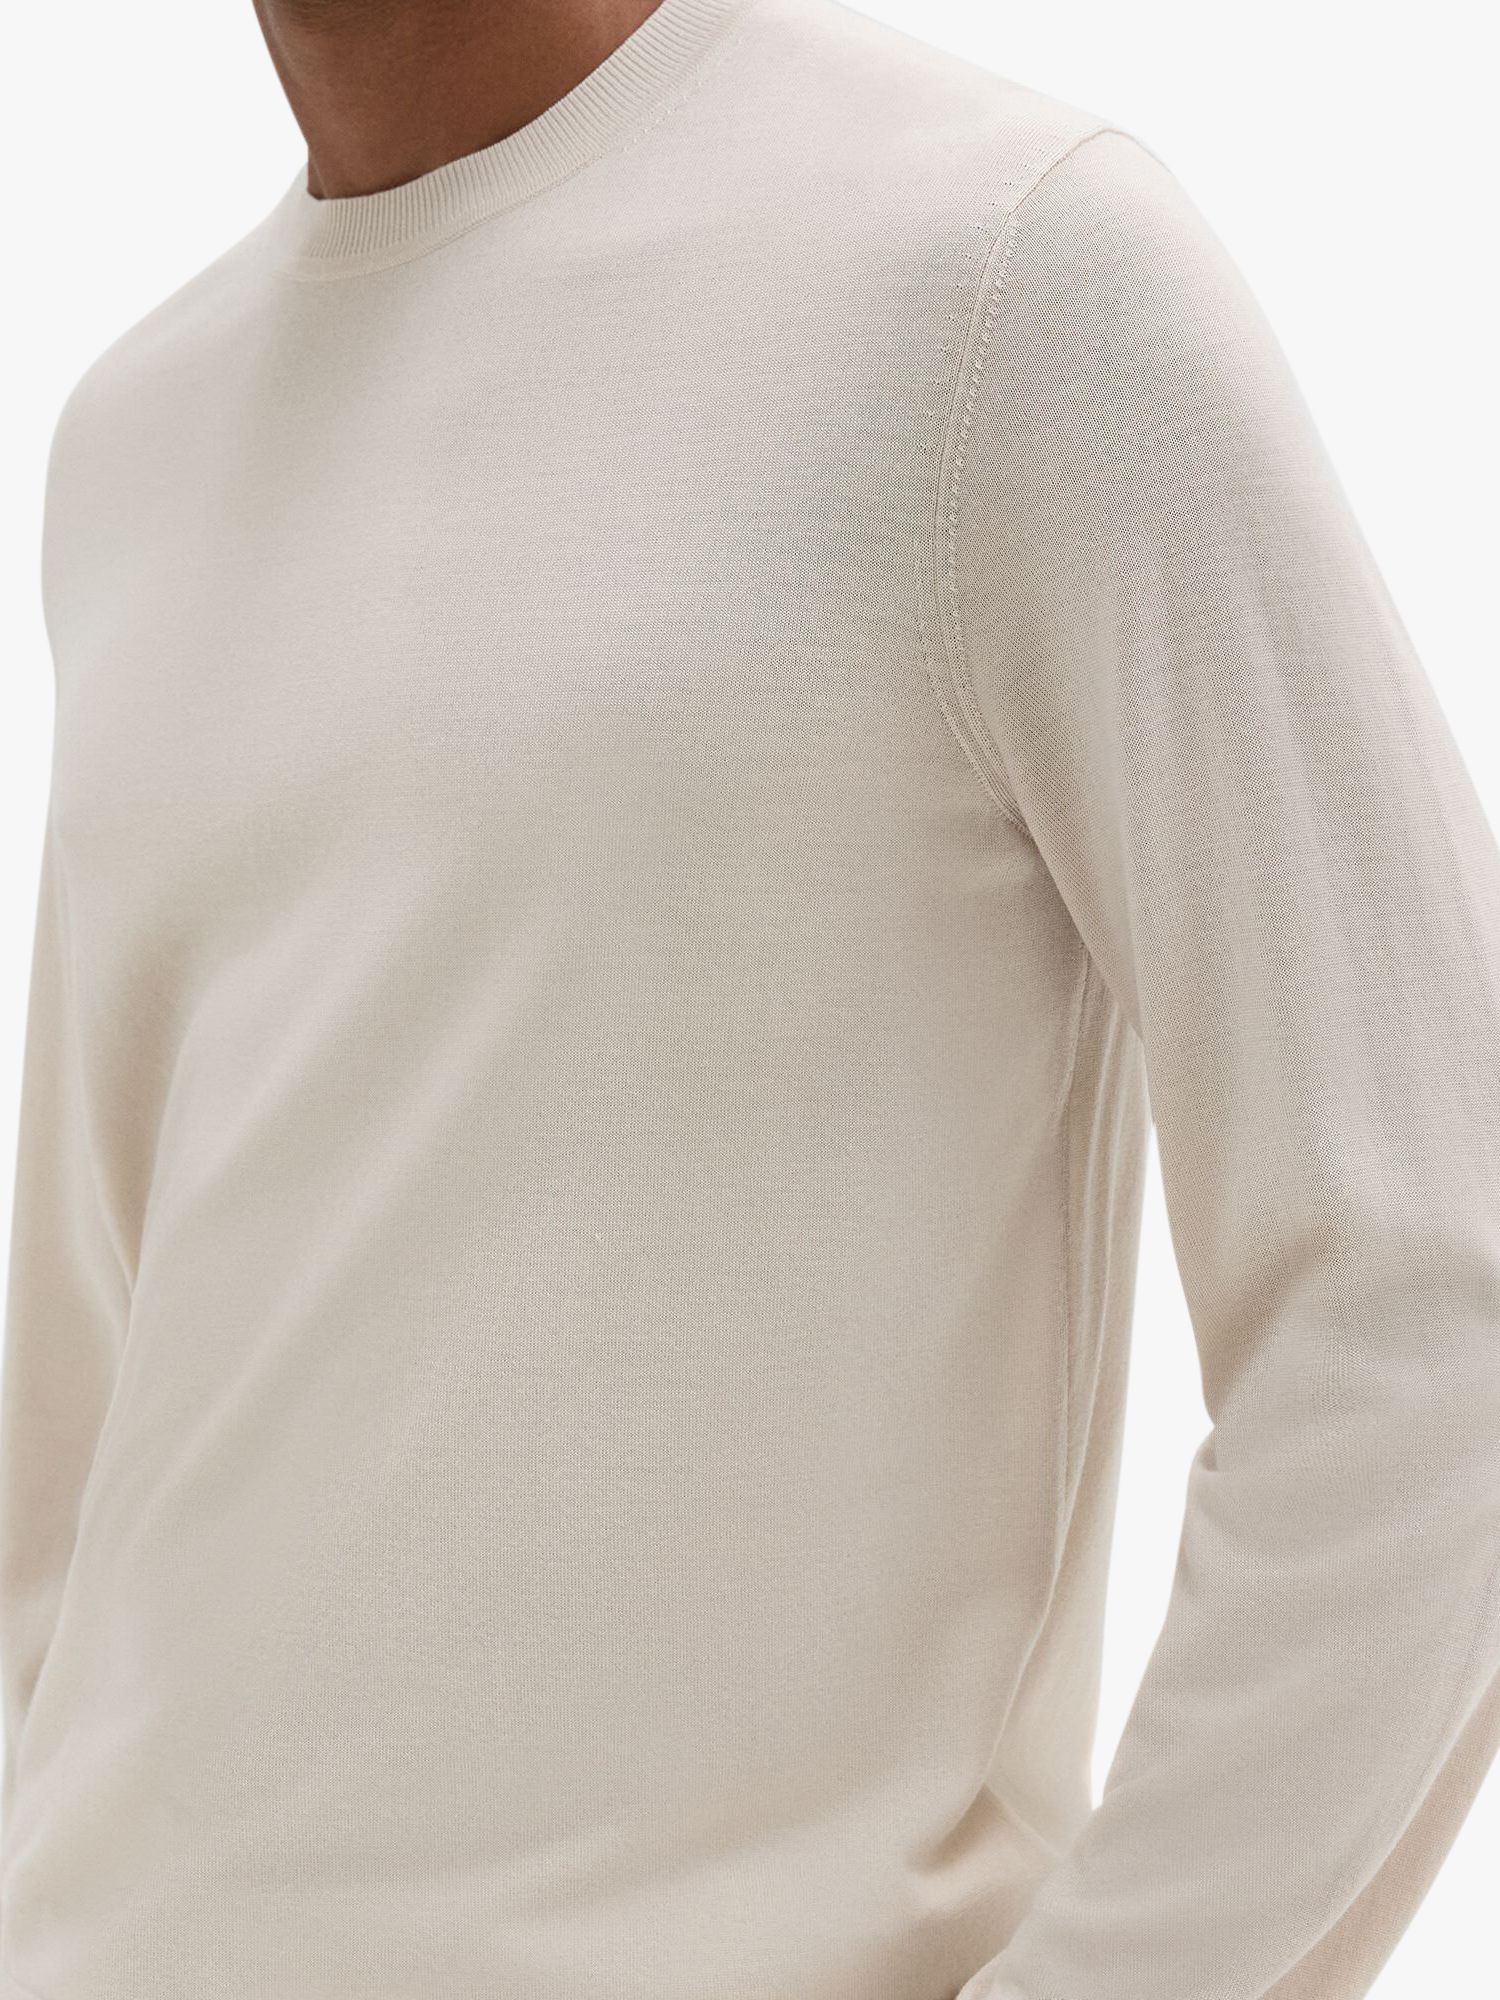 Buy Theory Wool Blend Crew Neck Jumper, Sand Online at johnlewis.com